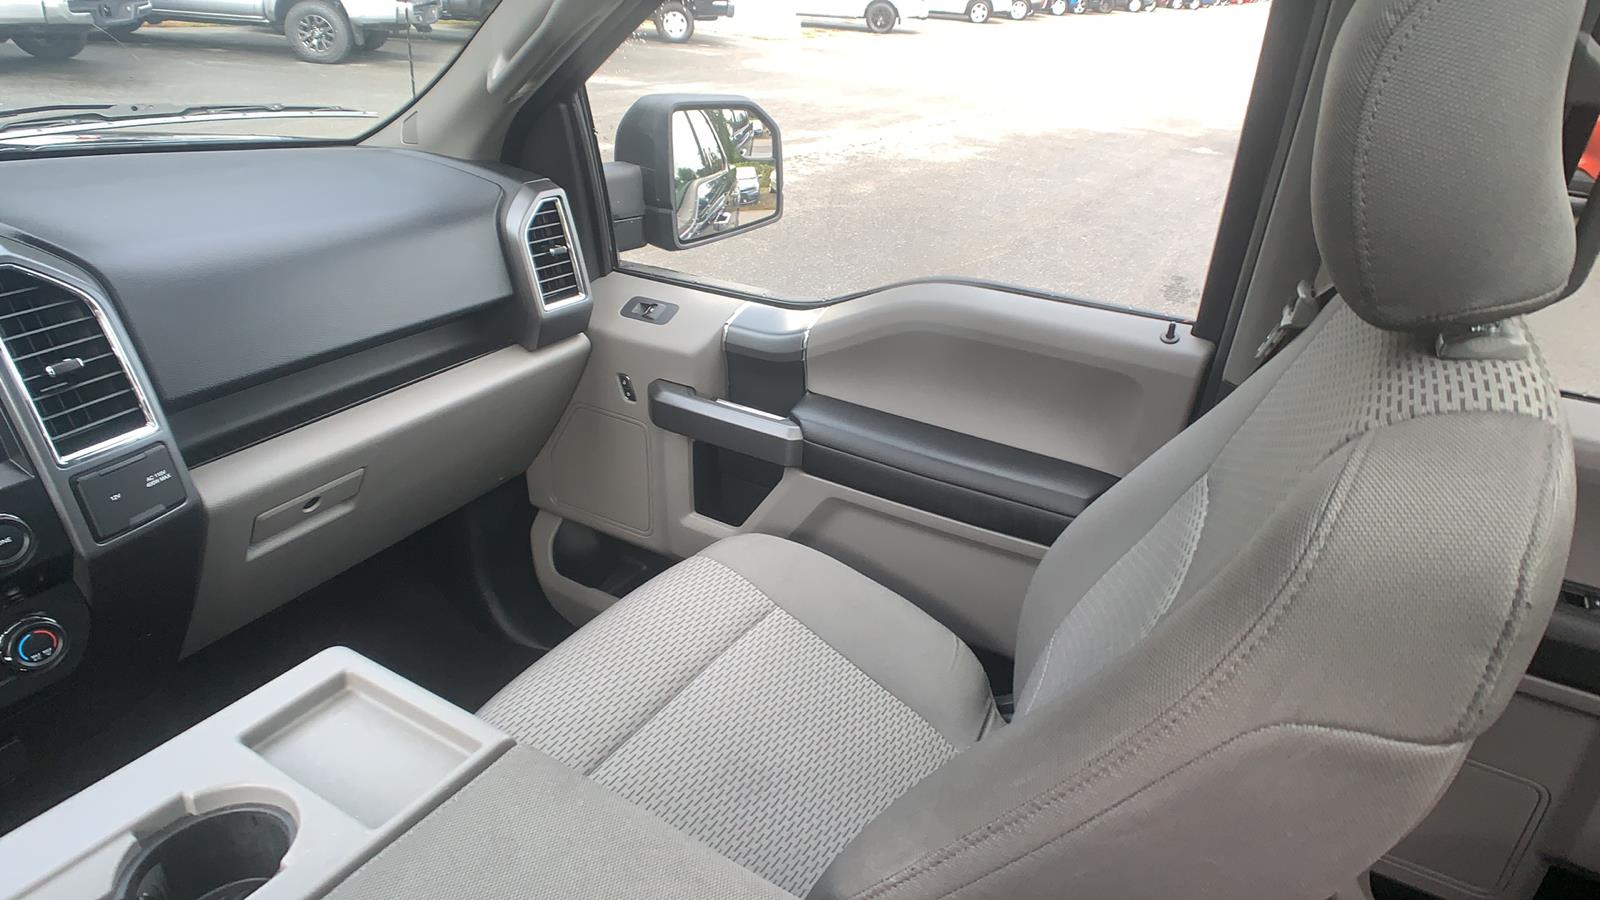 2016 Ford F-150 Short Bed